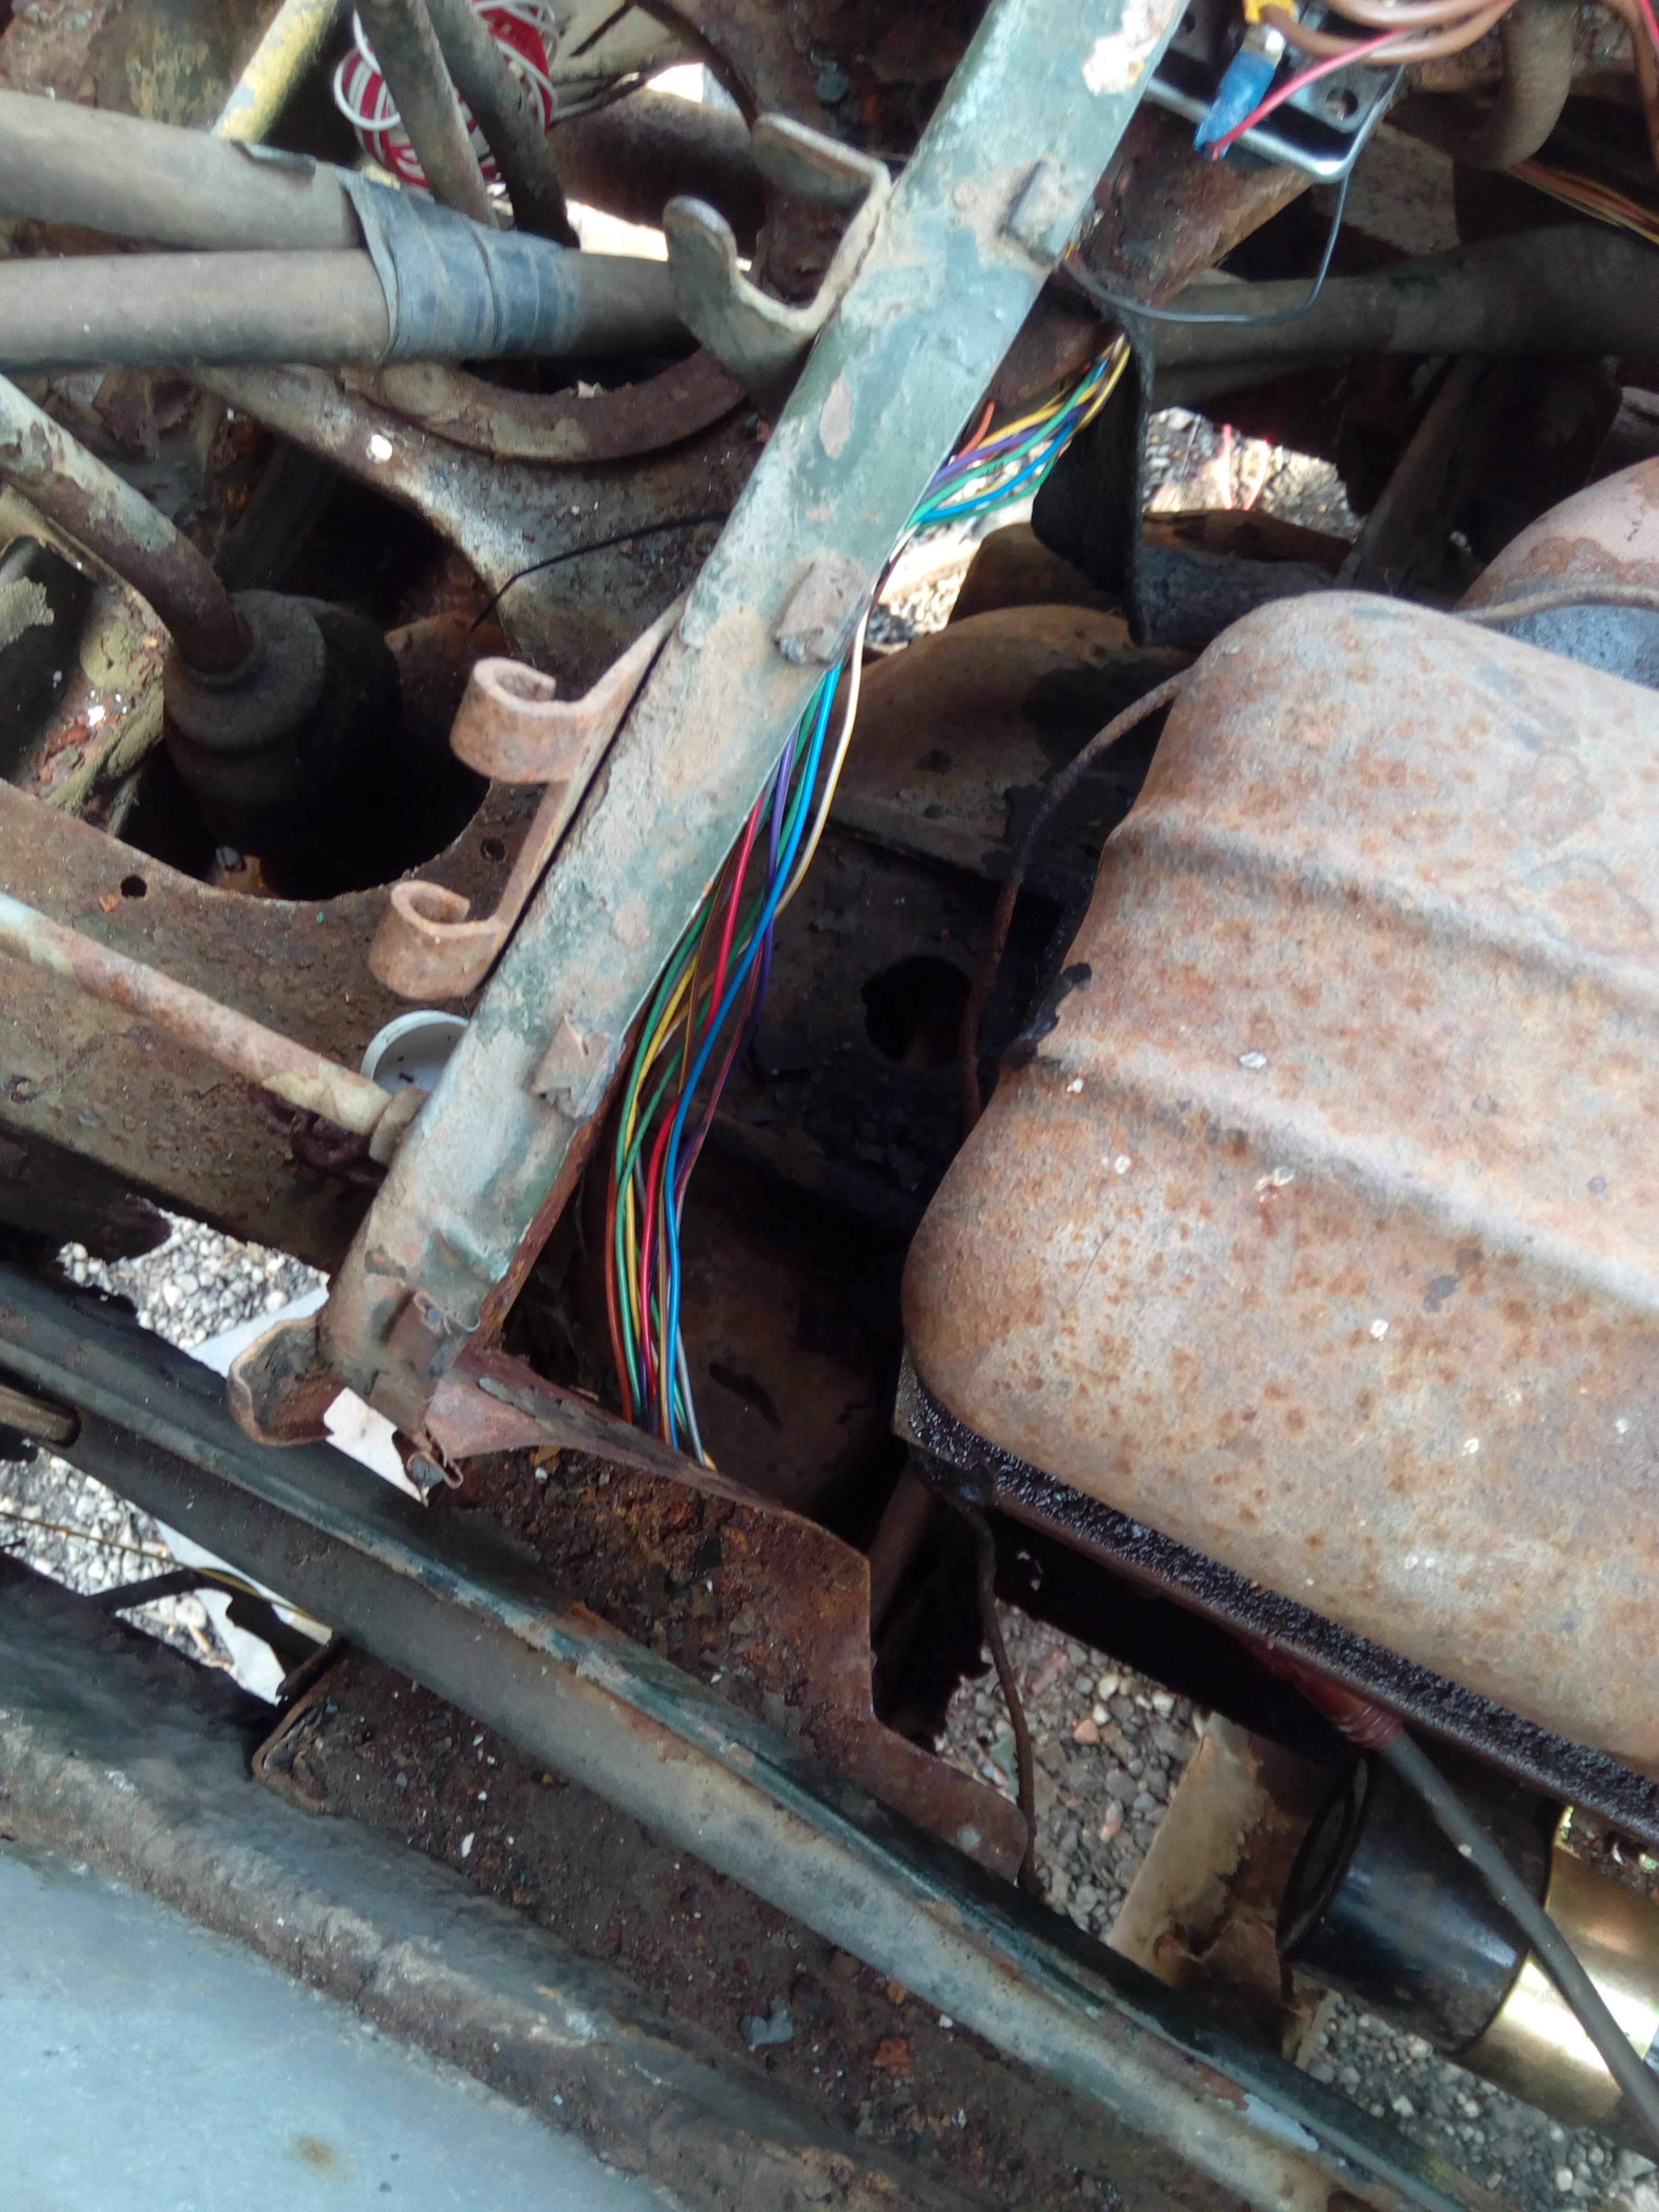 A rainbow of wires snaking its way through the engine bay, behind
the rusty engine